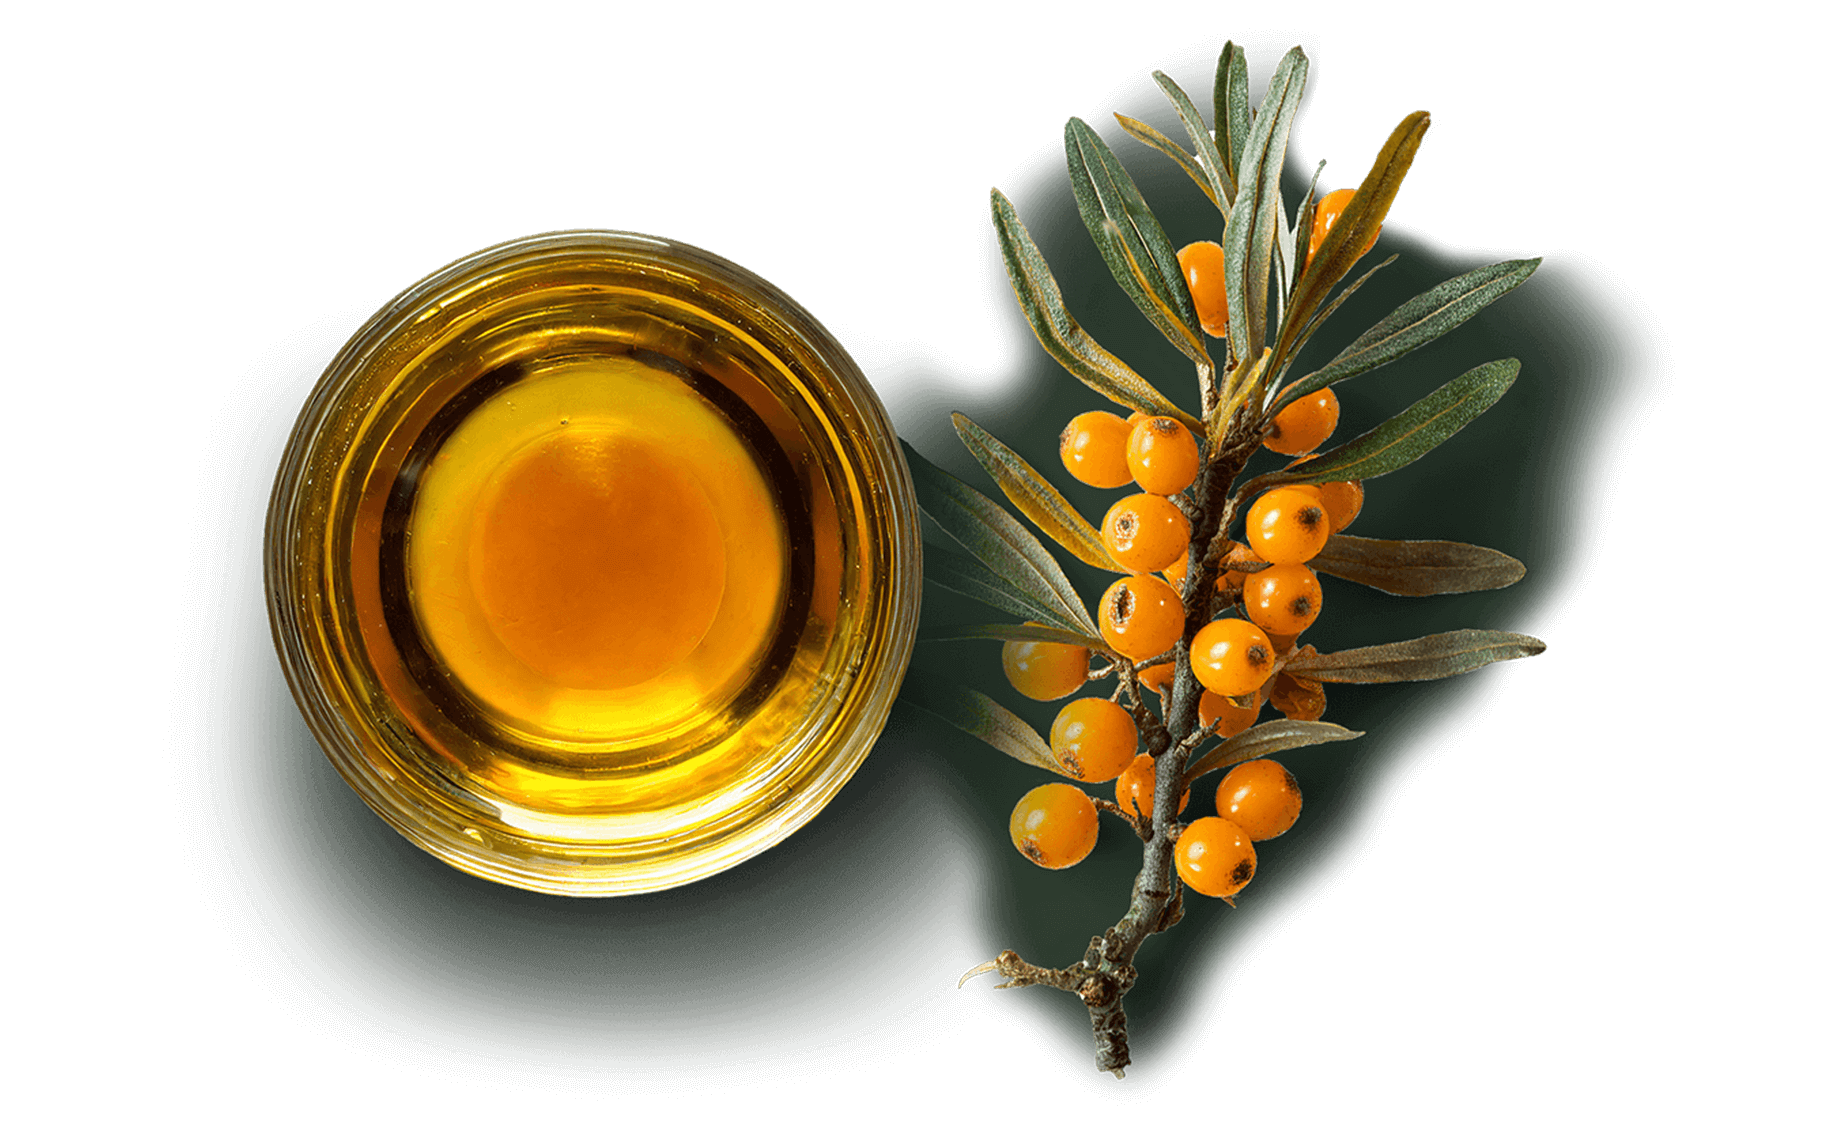 Wholesale Cold Pressed Oils | Cold Pressed Oil Suppliers